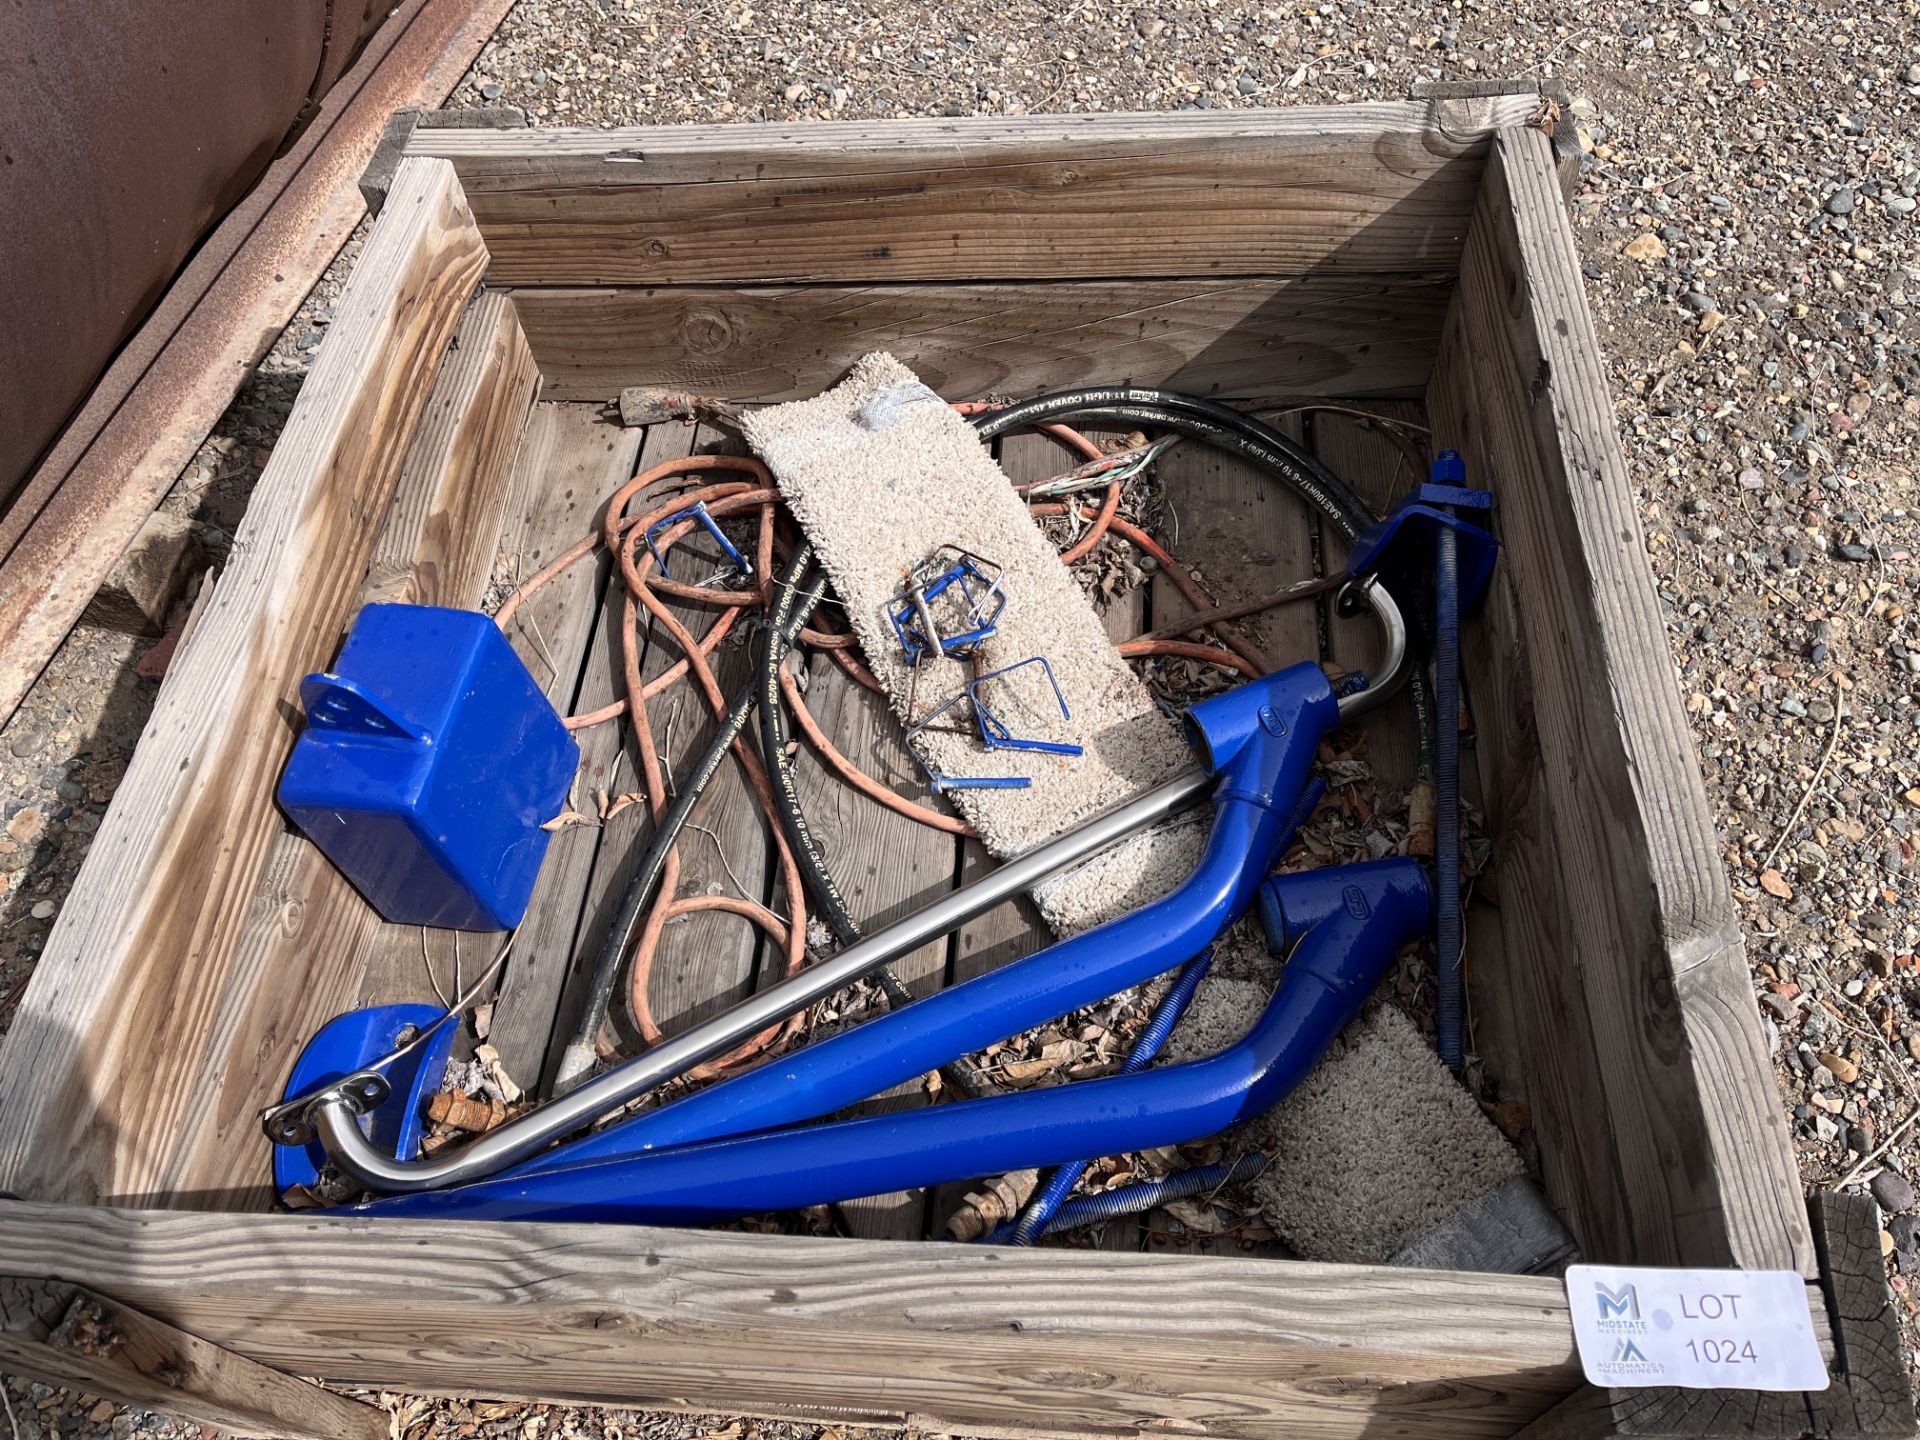 Wooden Crate with Tools - Image 2 of 3